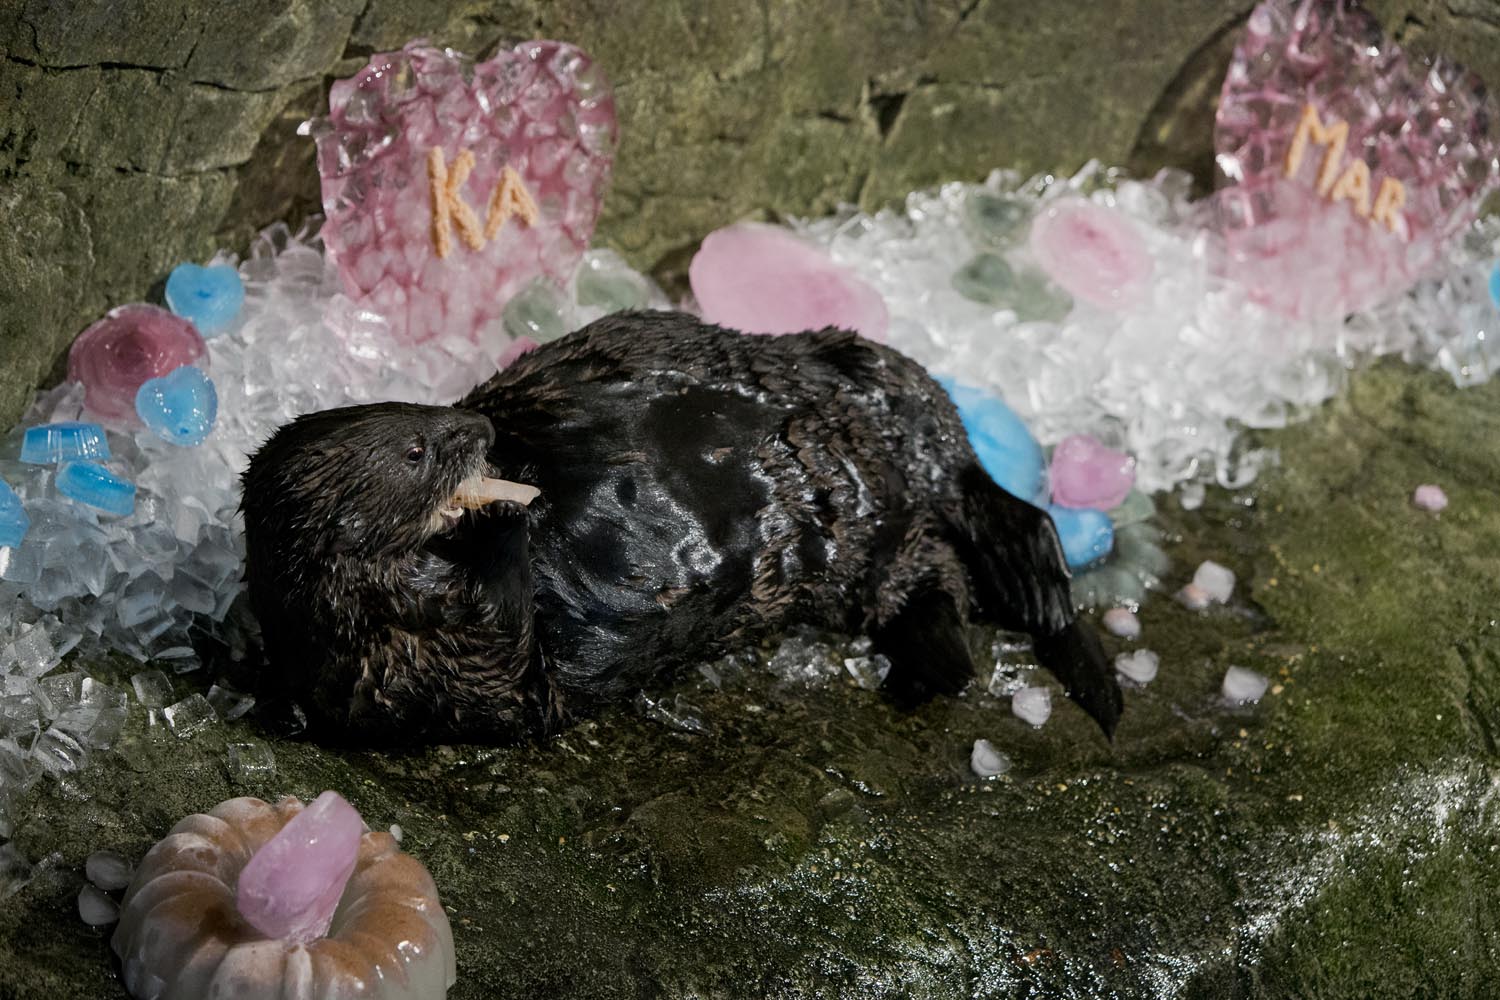 Shedd Aquarium's Otters Celebrate Valentine's Day with Icy Treats and More 3